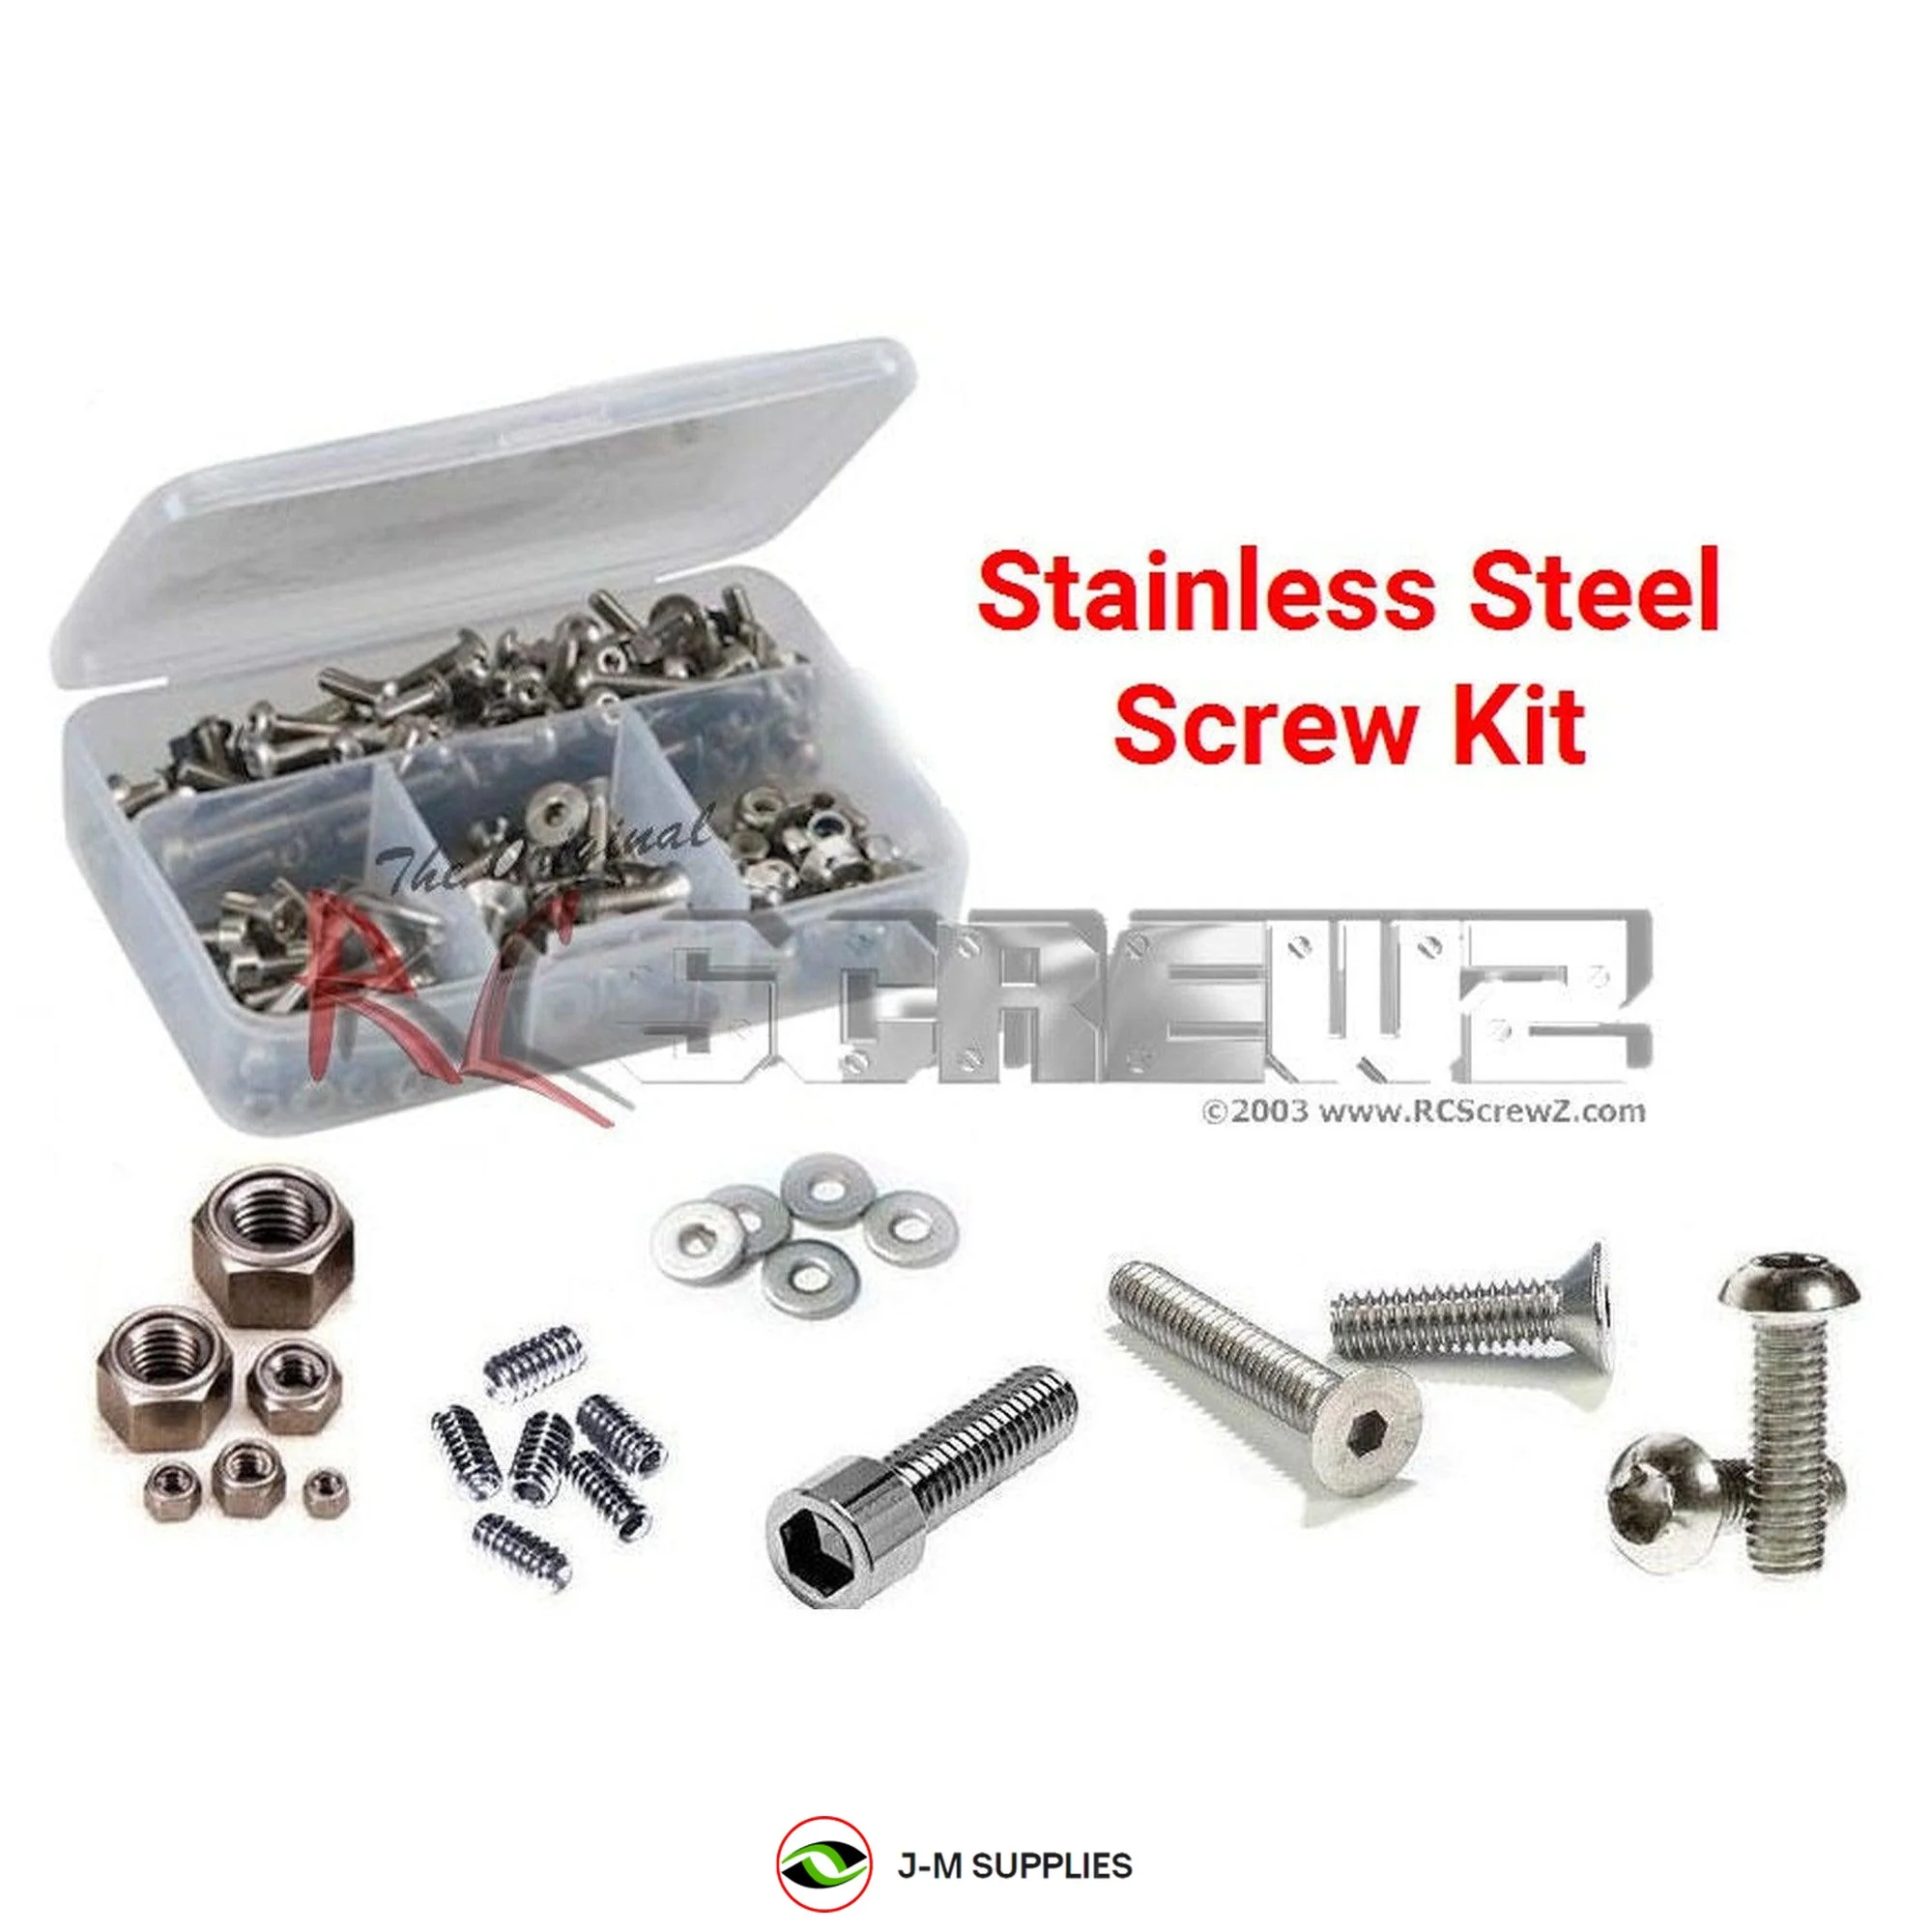 RCScrewZ Stainless Steel Screw Kit ftx020 for FTX DR8 Desert Racer 1/8th #5495 - Picture 1 of 12